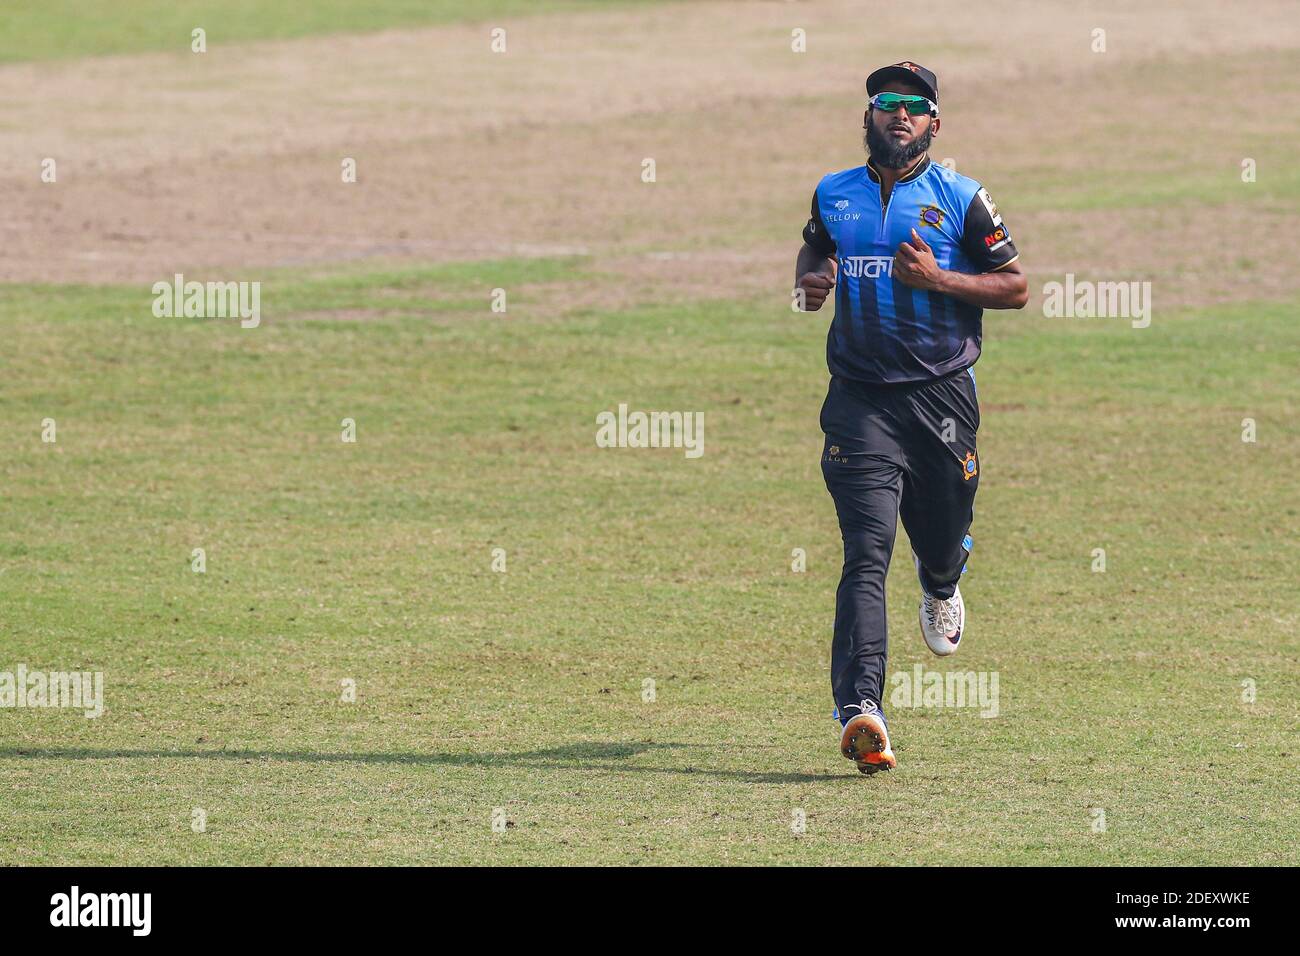 Beximco Dhaka cricket player Robiul Islam Robi in action during the  Bangabandhu T20 Cup 2020 between Fortune Barishal and Beximco Dhaka at the  Sher-e-Bangla National Cricket Stadium in Dhaka on December 02,